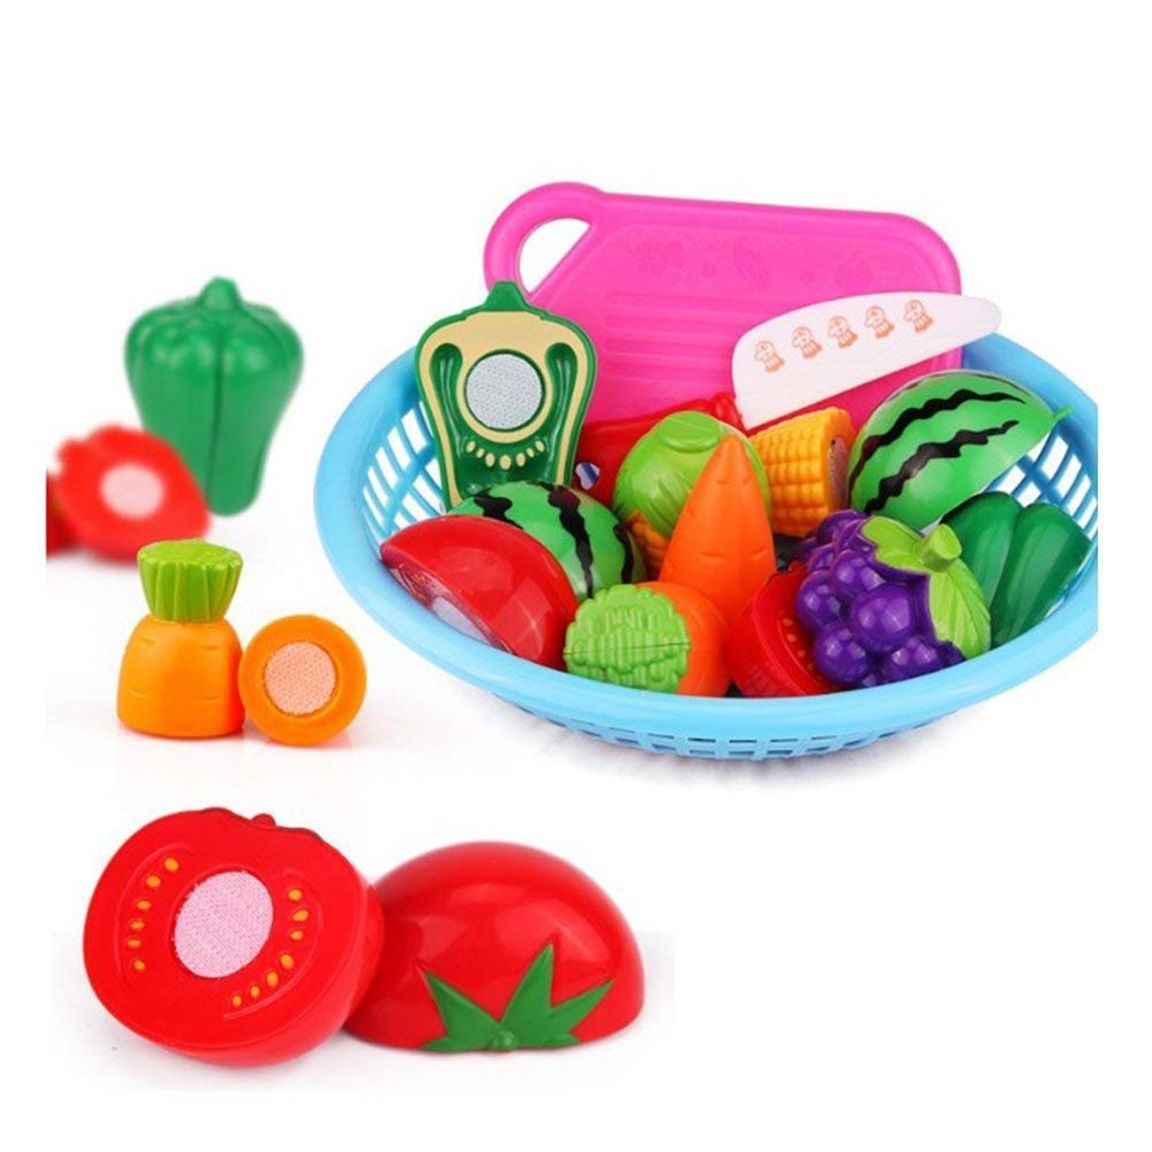     			Fratelli Play Food Realistic Sliceable 13pc Fruits & Vegetables with Cutting Board,Knife and Storage Basket Toy for Kids, Multicolor